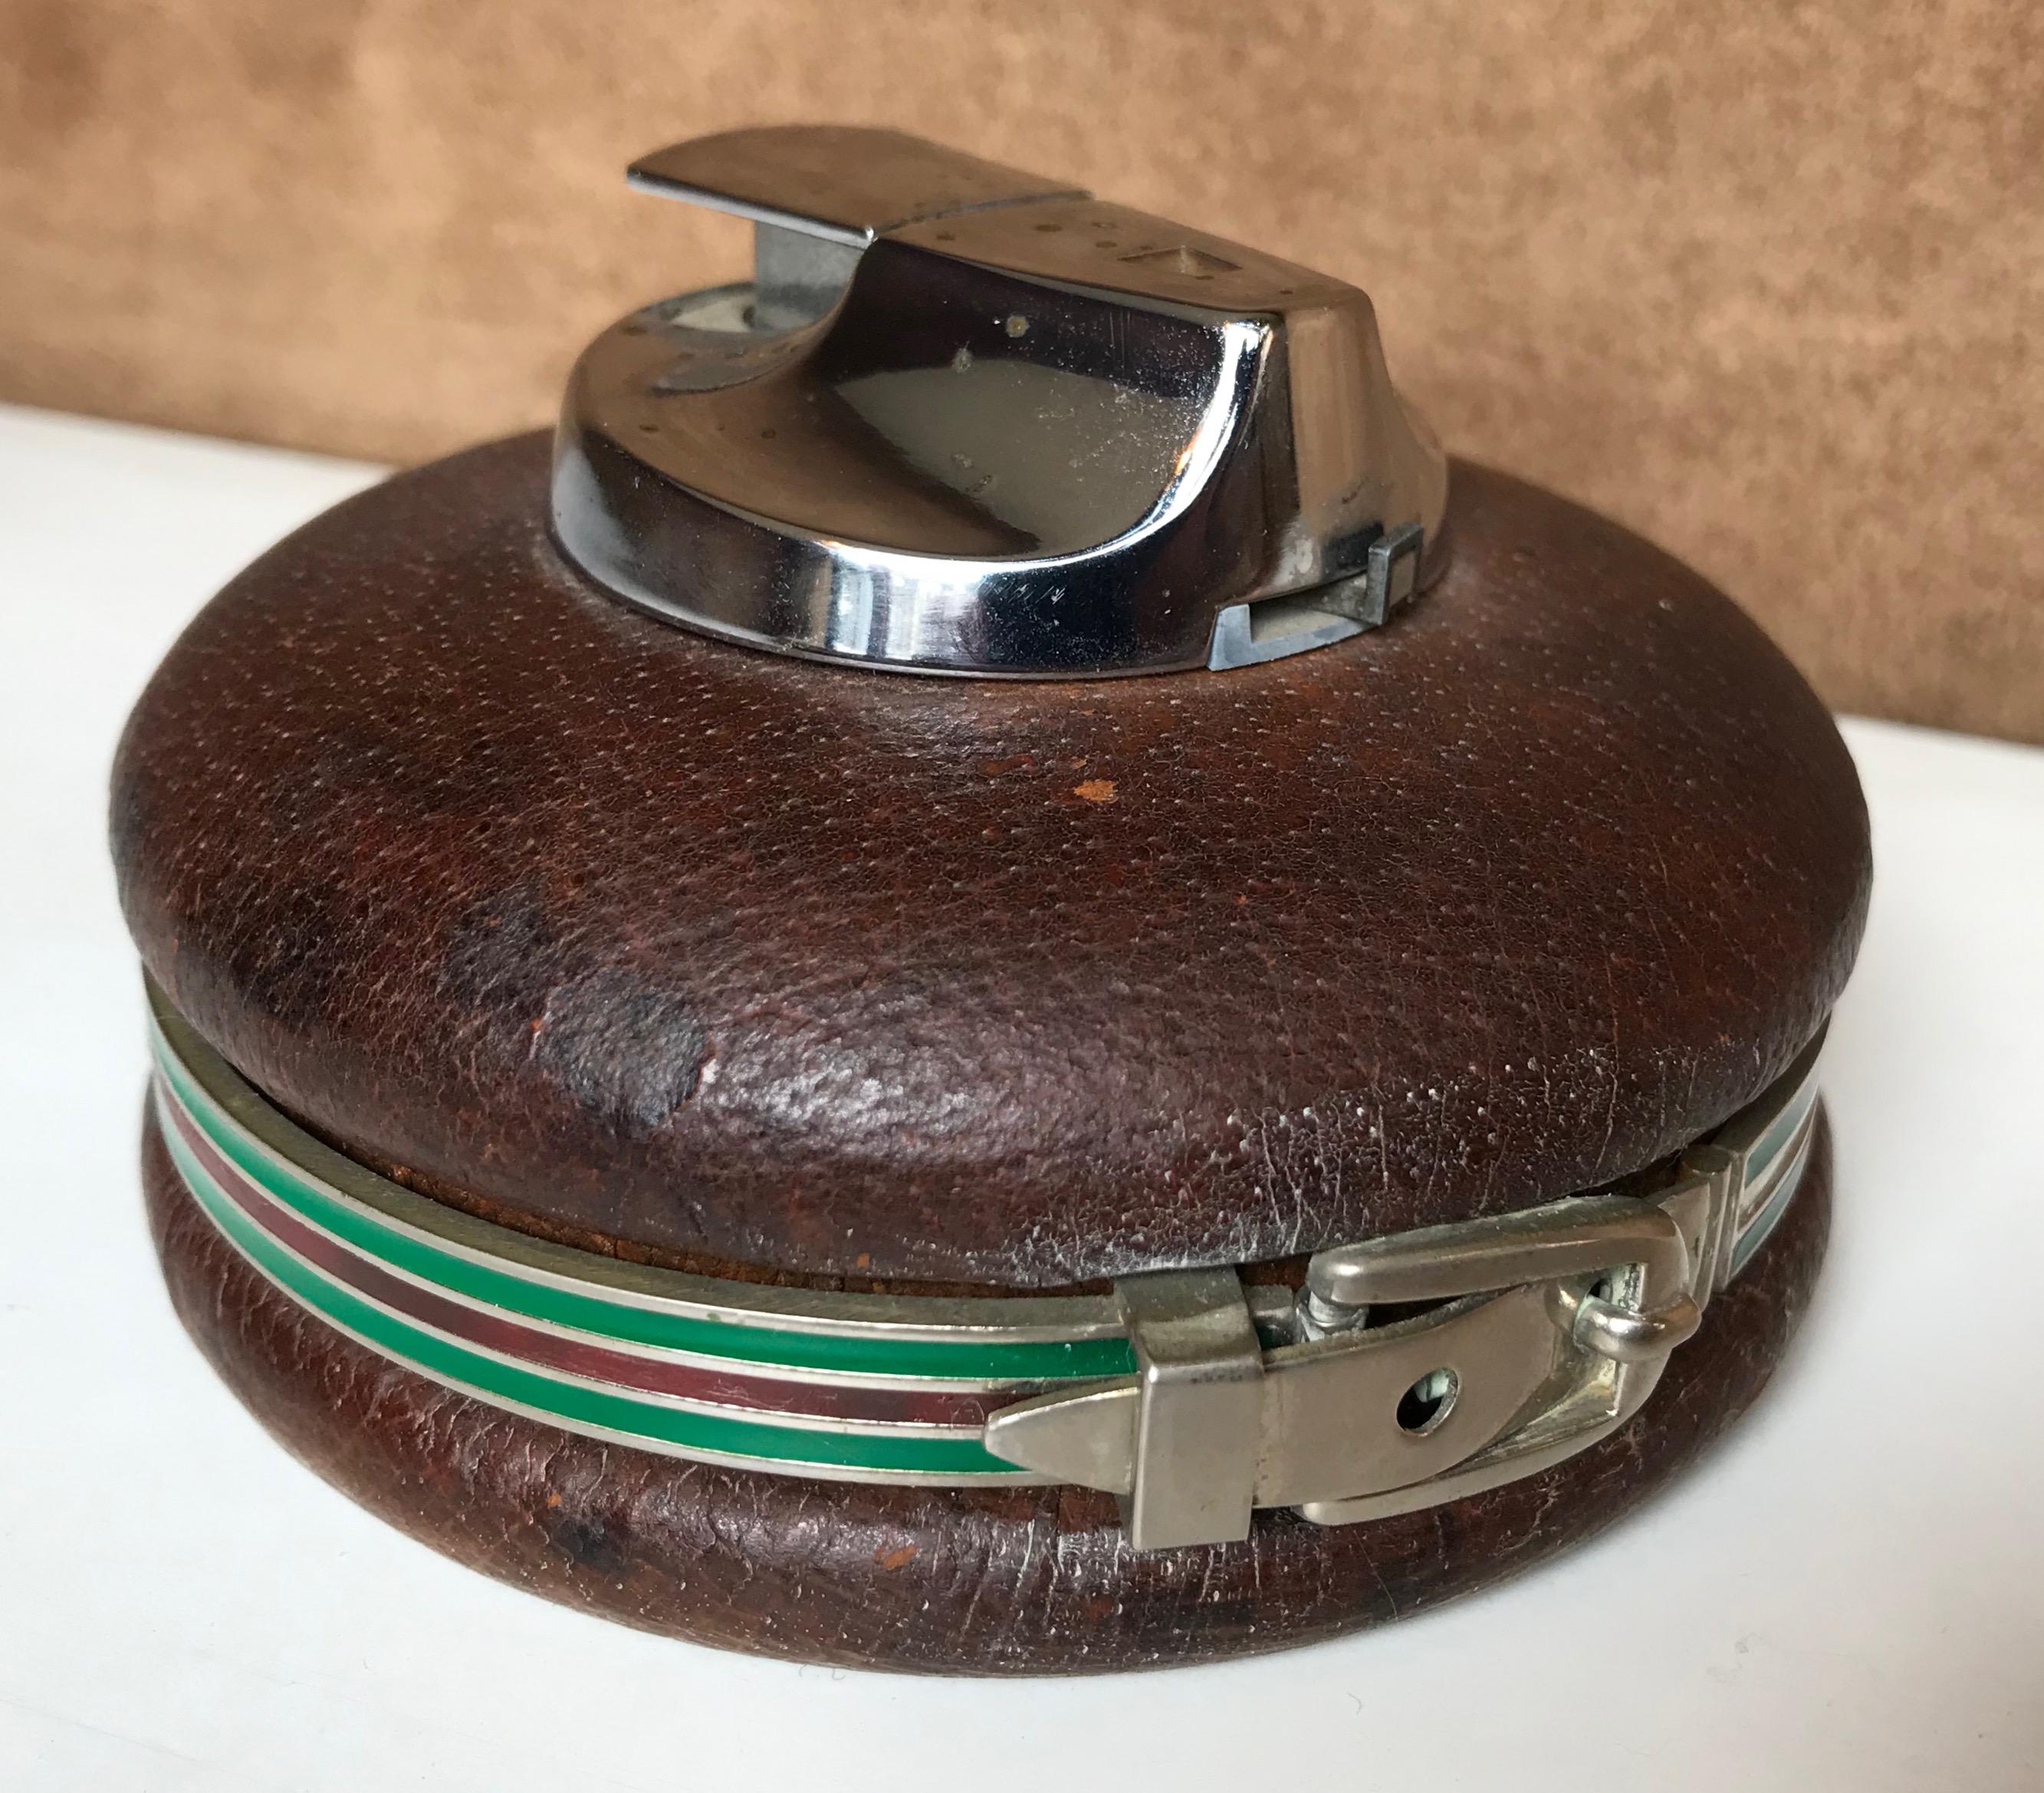 Spherical leather Gucci lighter, made in Italy, 1980s
A stylish circular silver leather lighter by Gucci, with a leather band around the body in the signature Gucci colors of green and red
Marked Gucci MADE IN ITALY to the base.